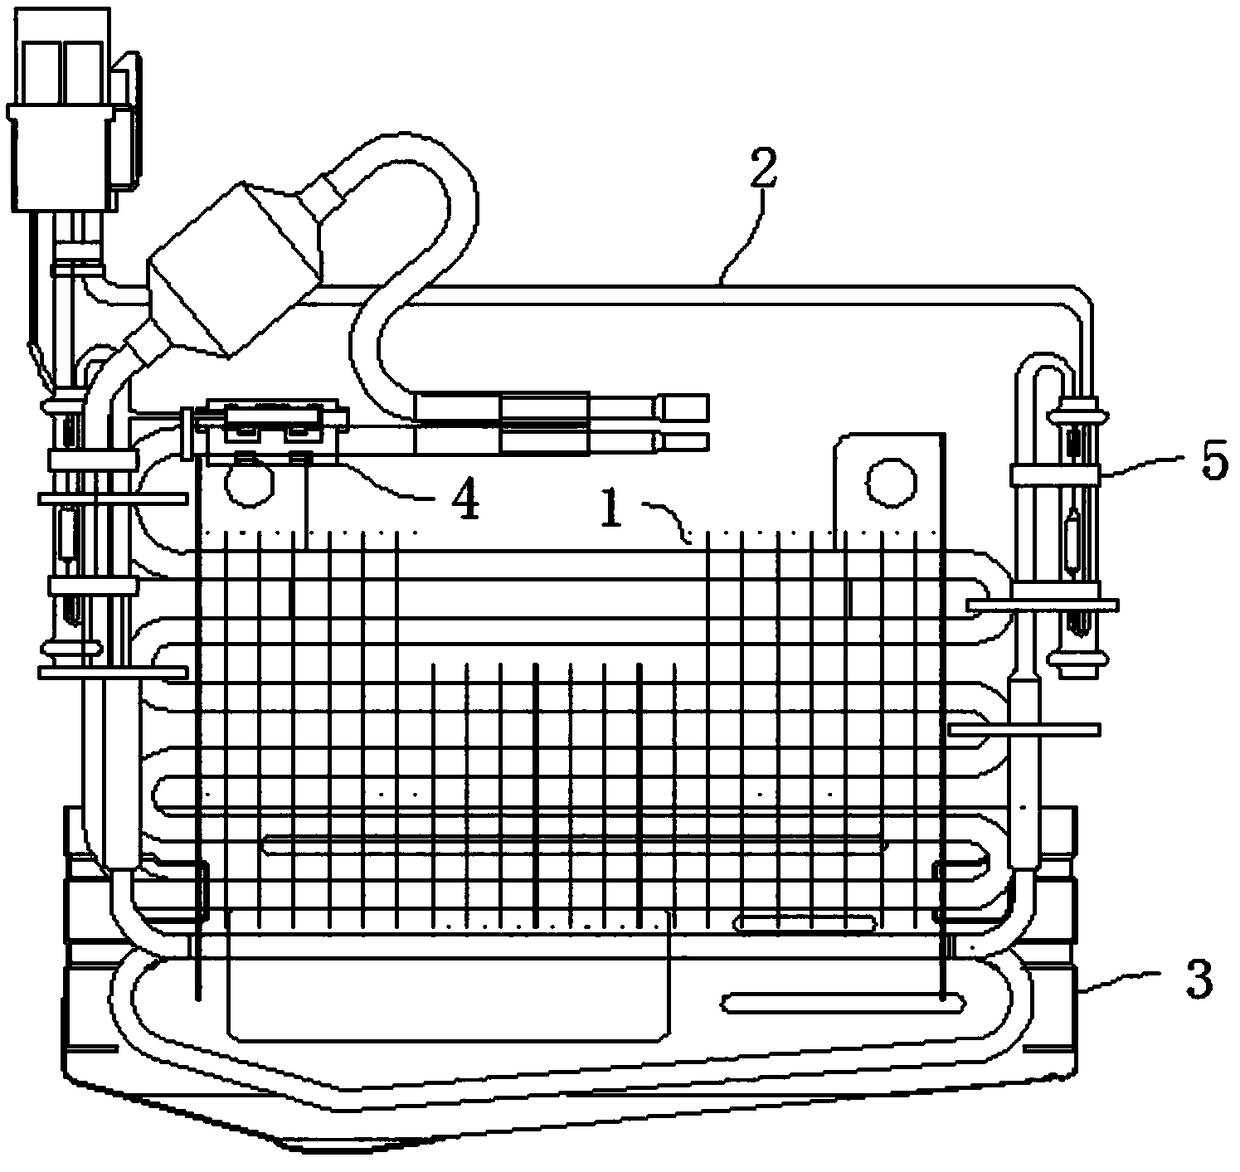 Domestic refrigerator freeze evaporator integrated assembly device